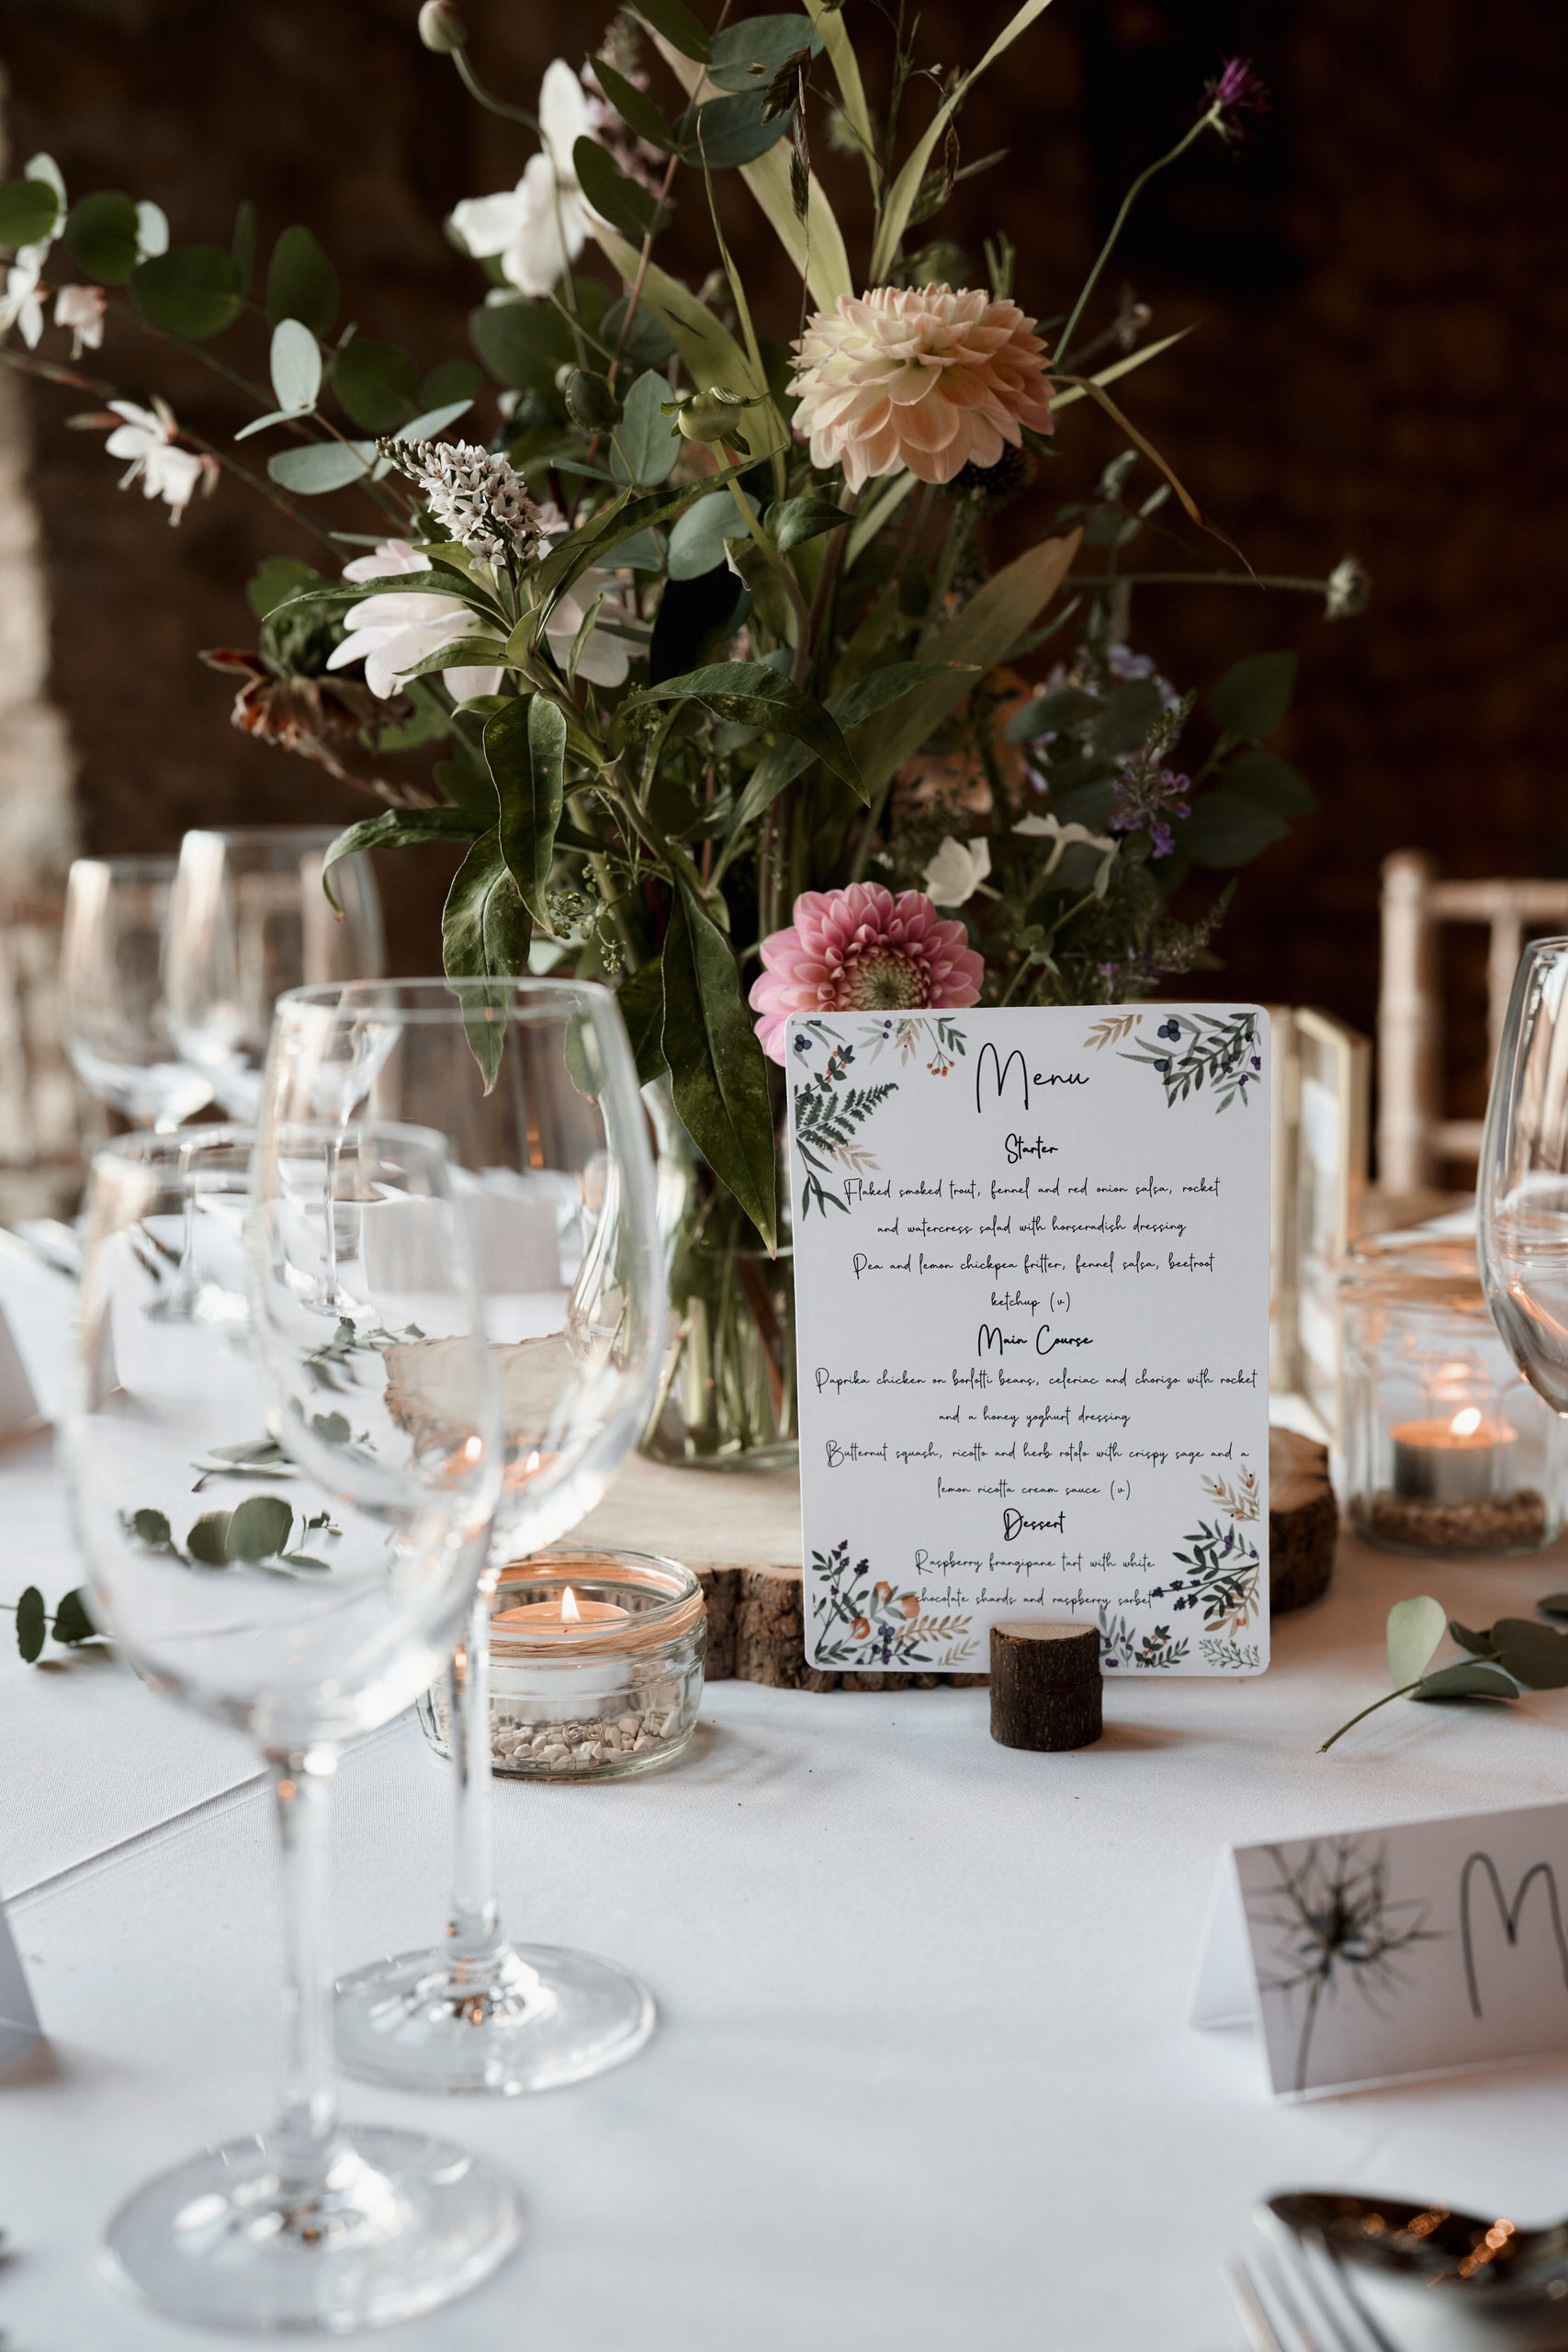 A table set-up with flowers and a name card.